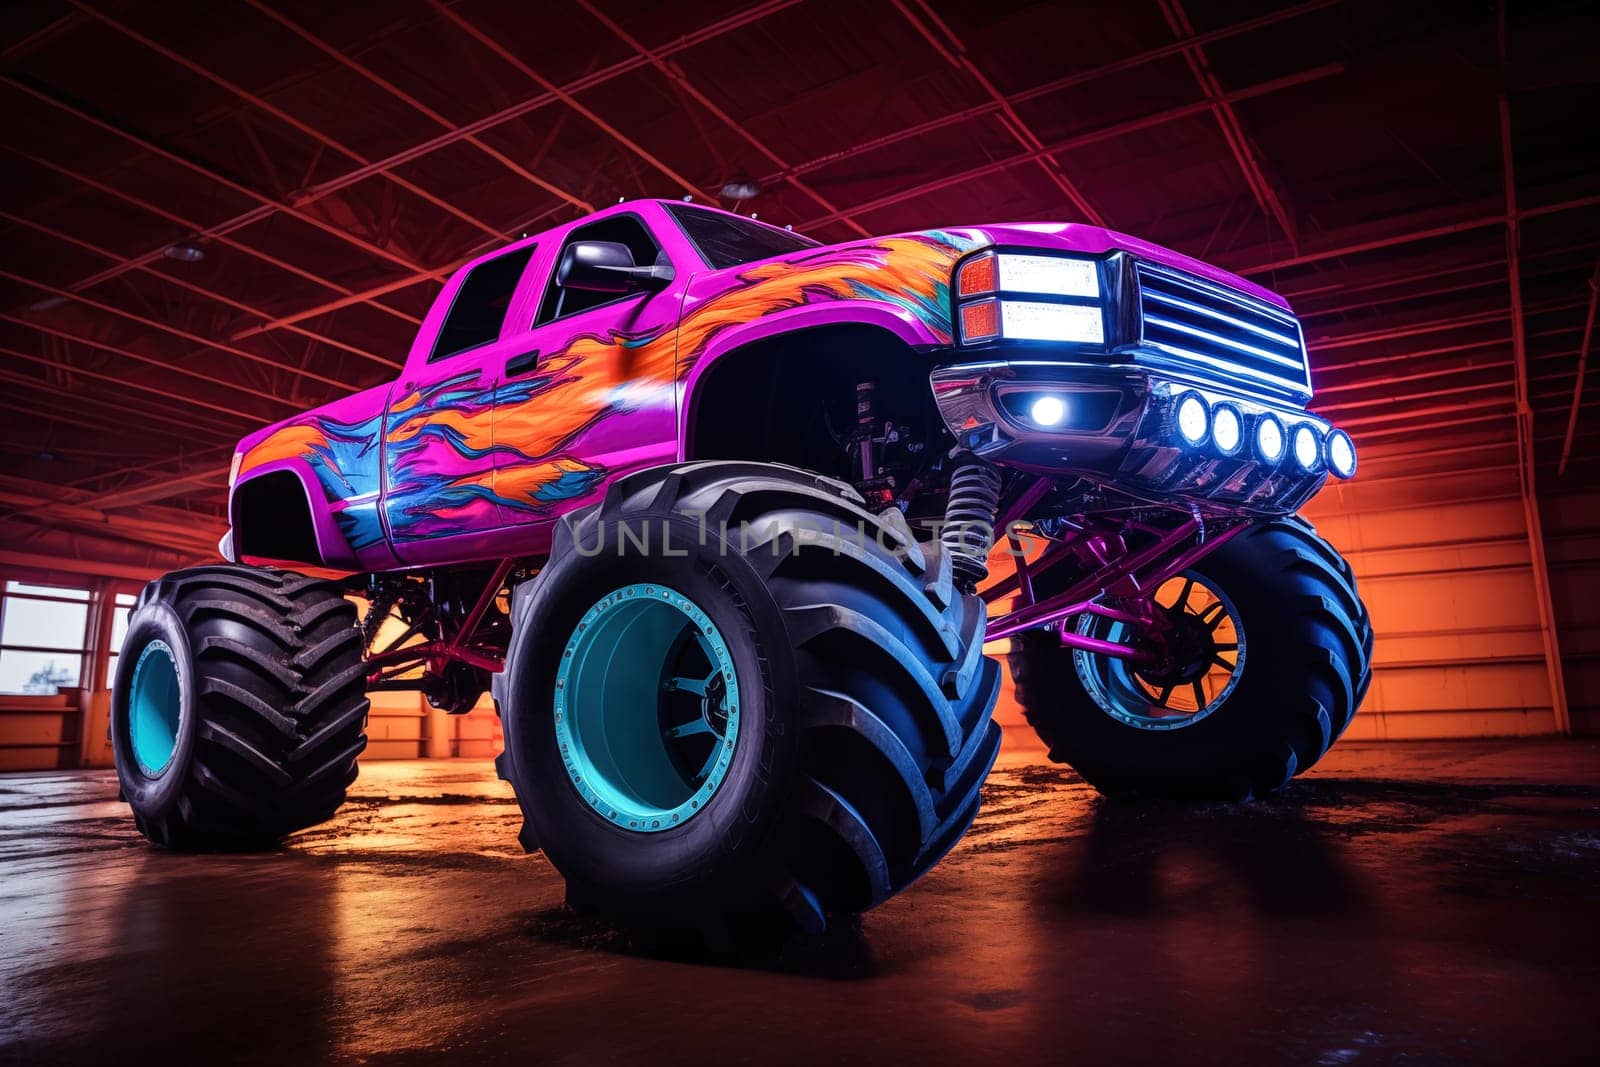 Monster truck illuminated by neon lights - excitement and thrill of an extreme sport and entertainment monster truck stunts racing show